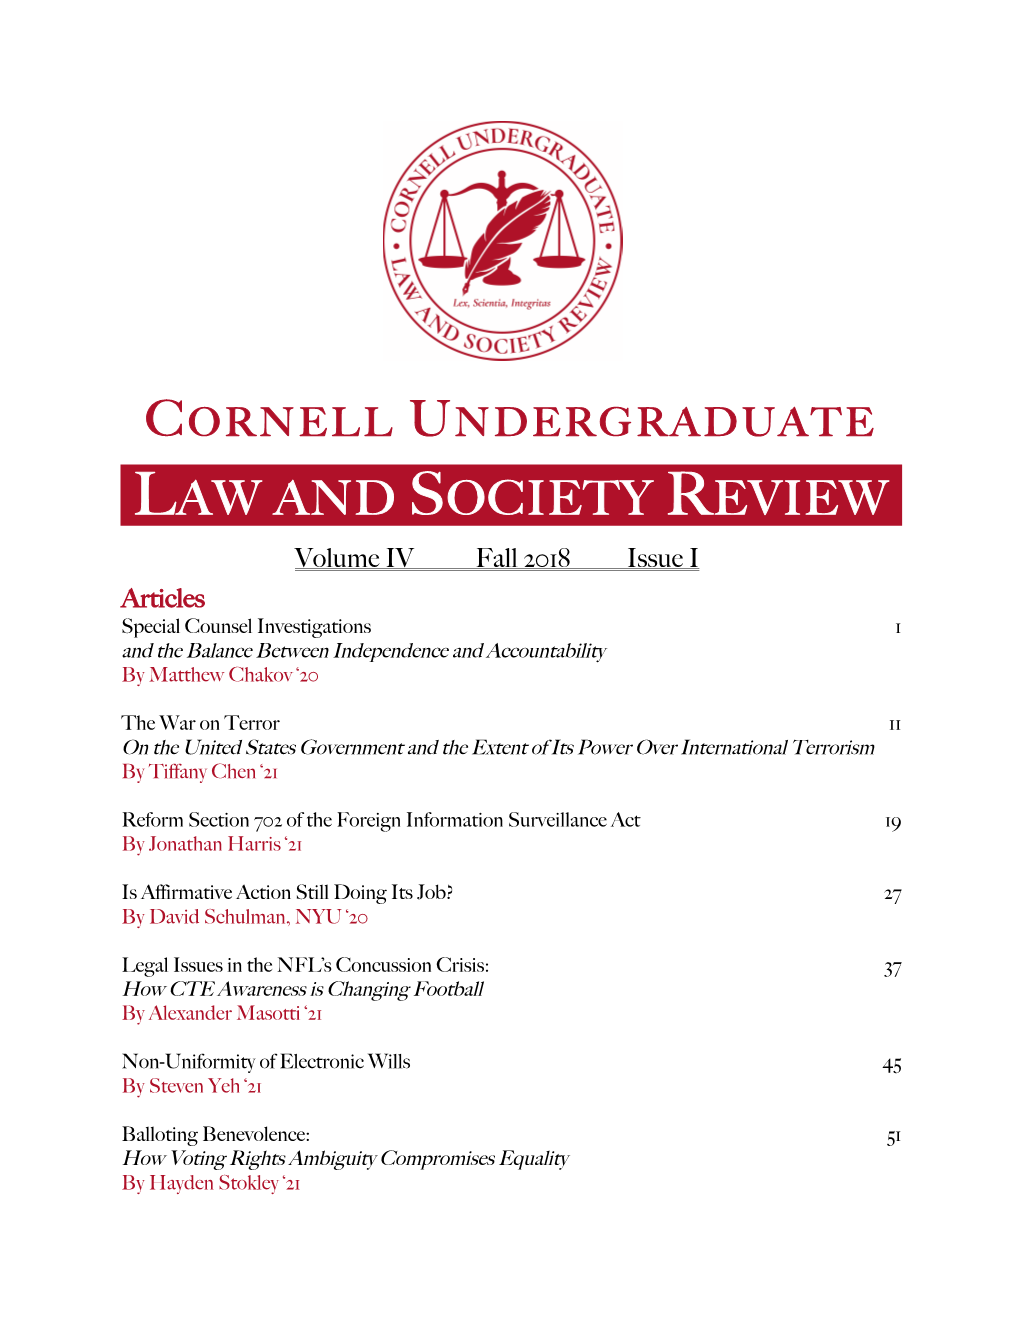 Law and Society Review